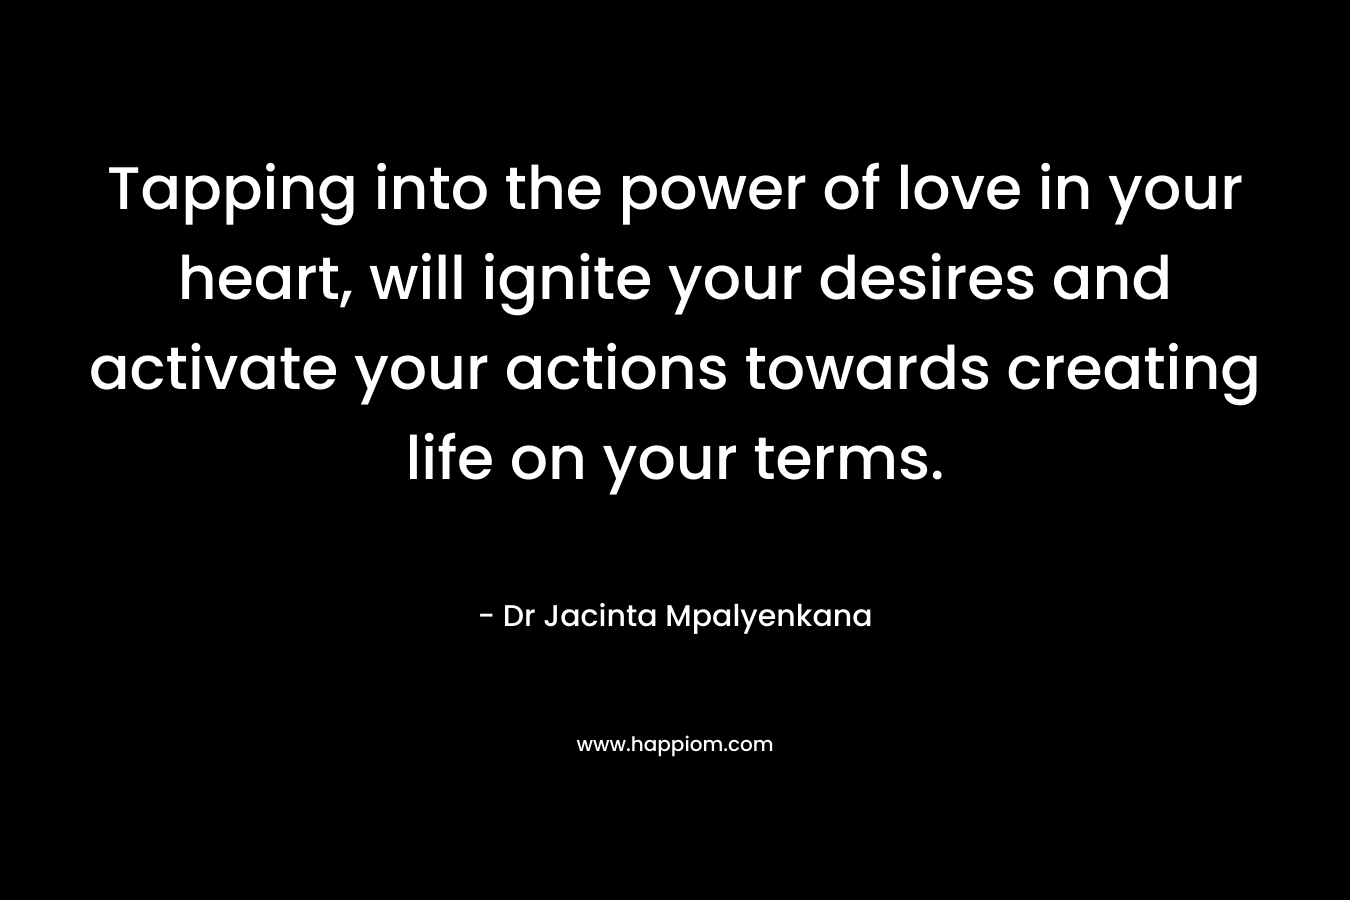 Tapping into the power of love in your heart, will ignite your desires and activate your actions towards creating life on your terms. – Dr Jacinta Mpalyenkana